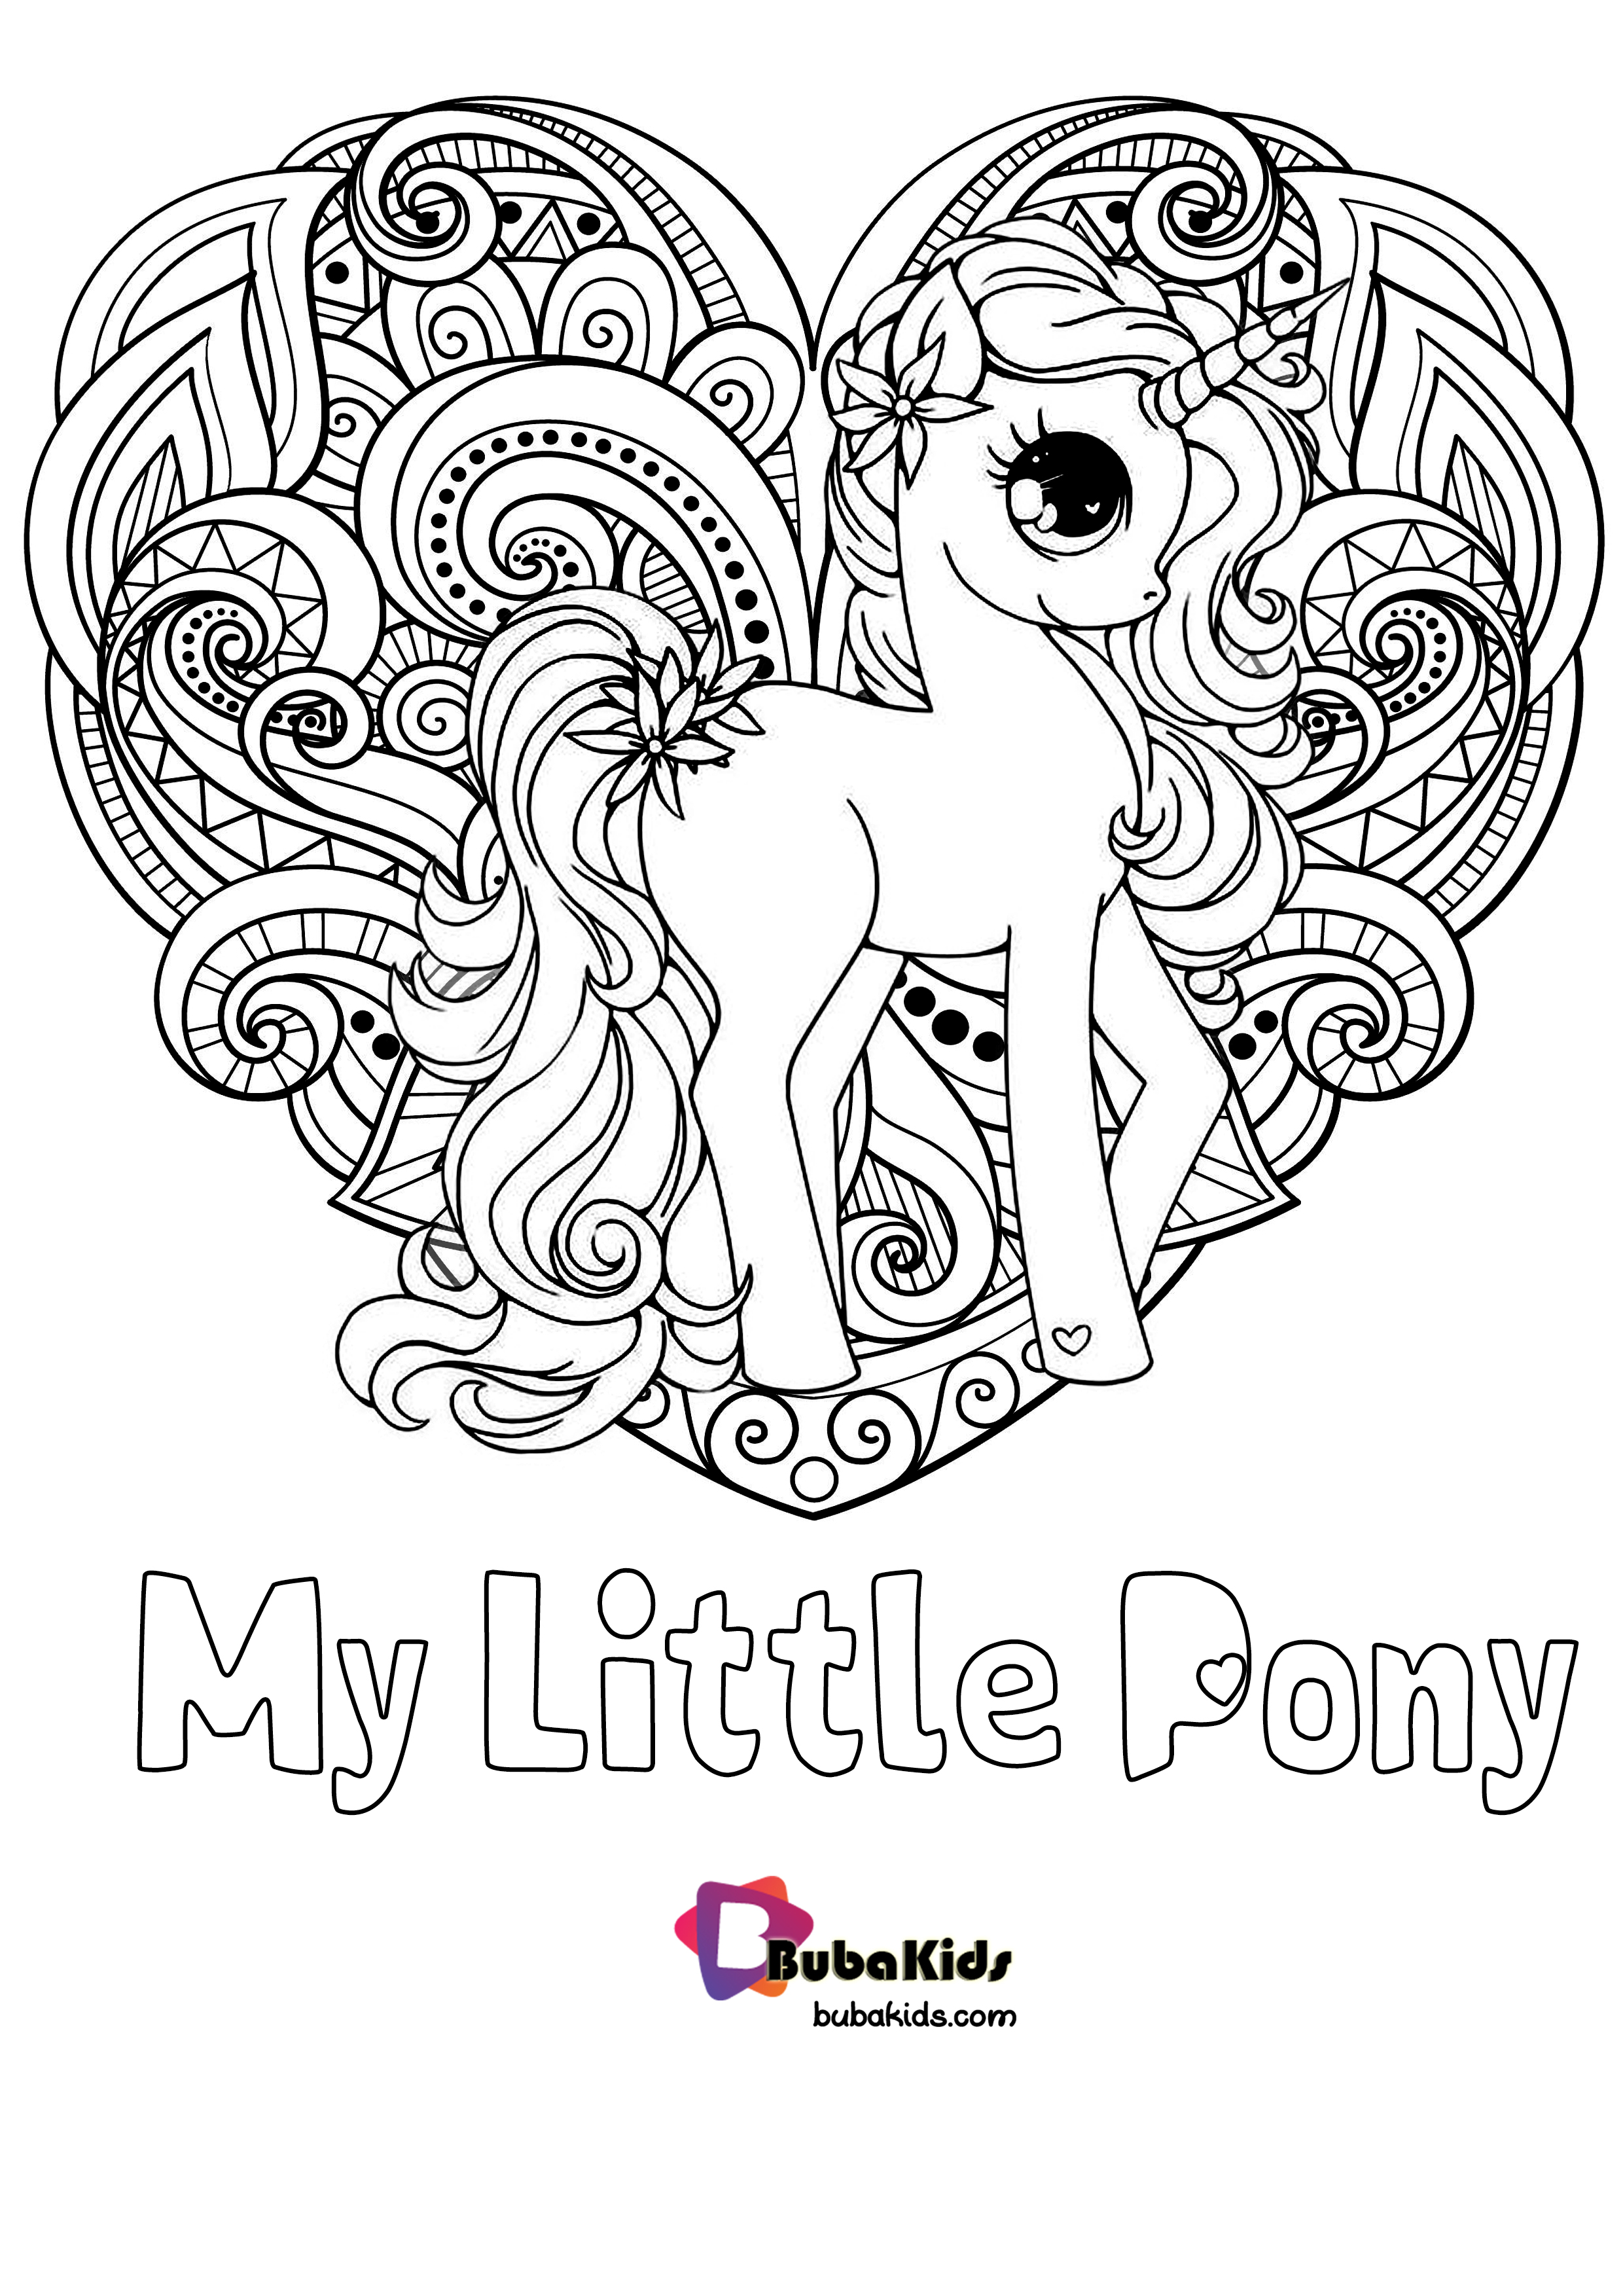 Mandala Love My Little Pony Coloring Pages Wallpaper